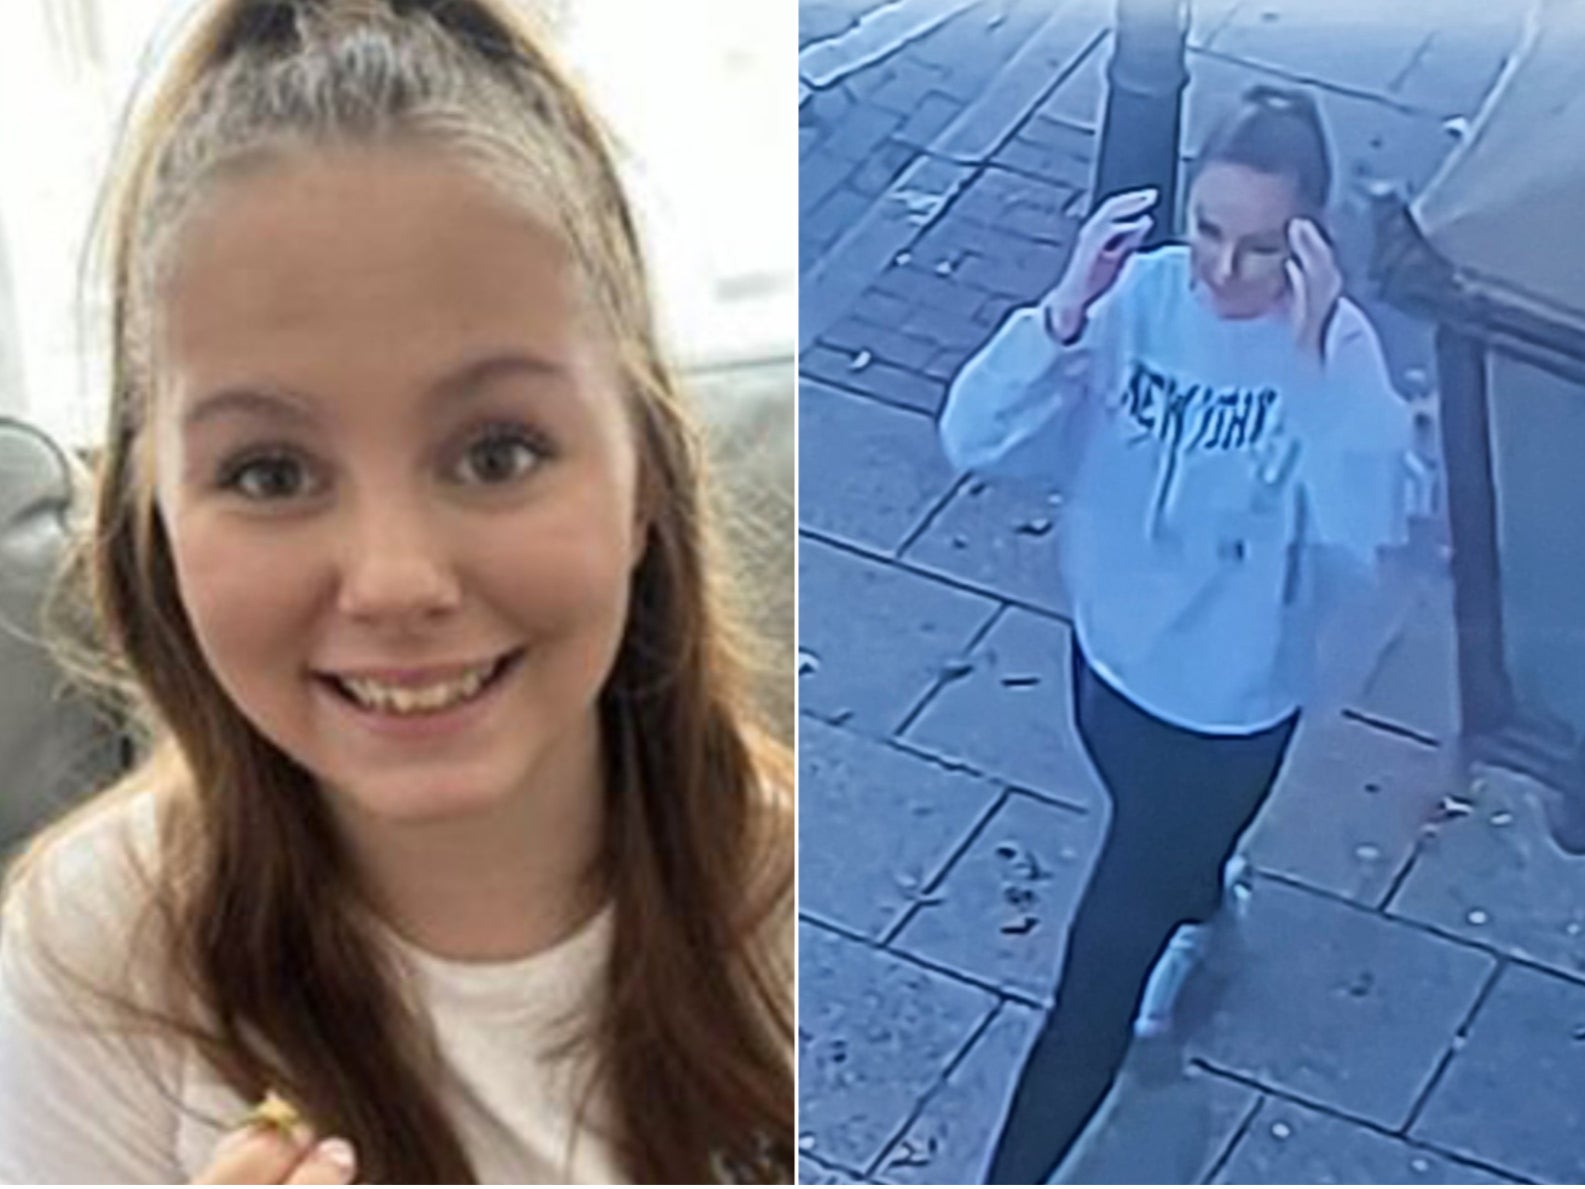 Grace Fisher, 16, was reported missing on Friday 13 October